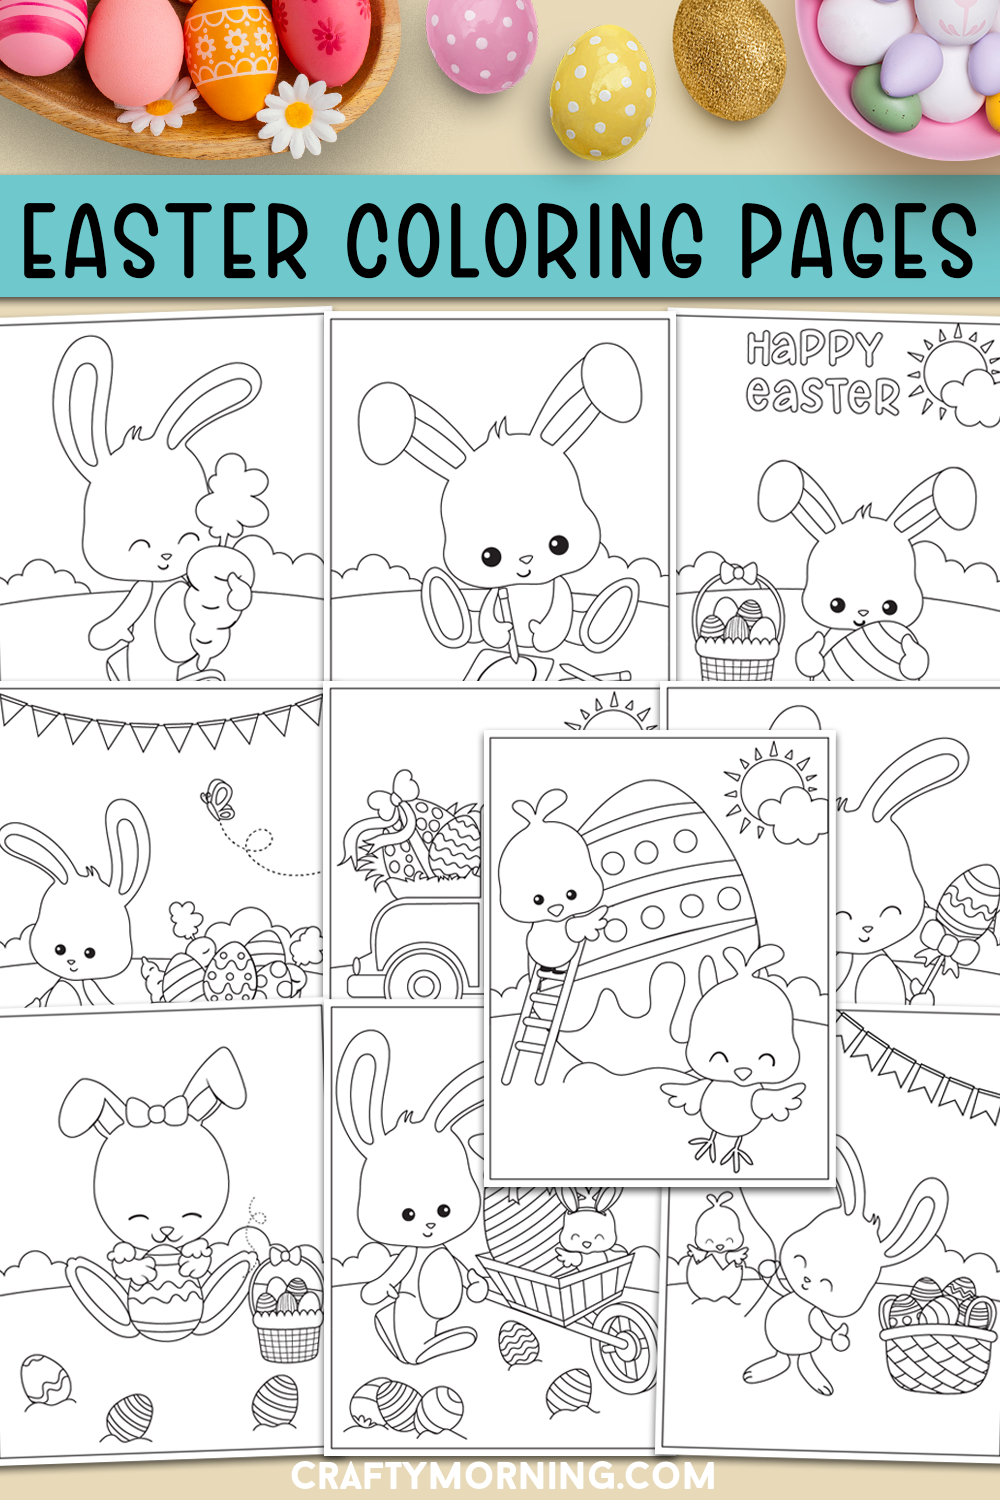 Free Printable Easter Coloring Pages - Crafty Morning